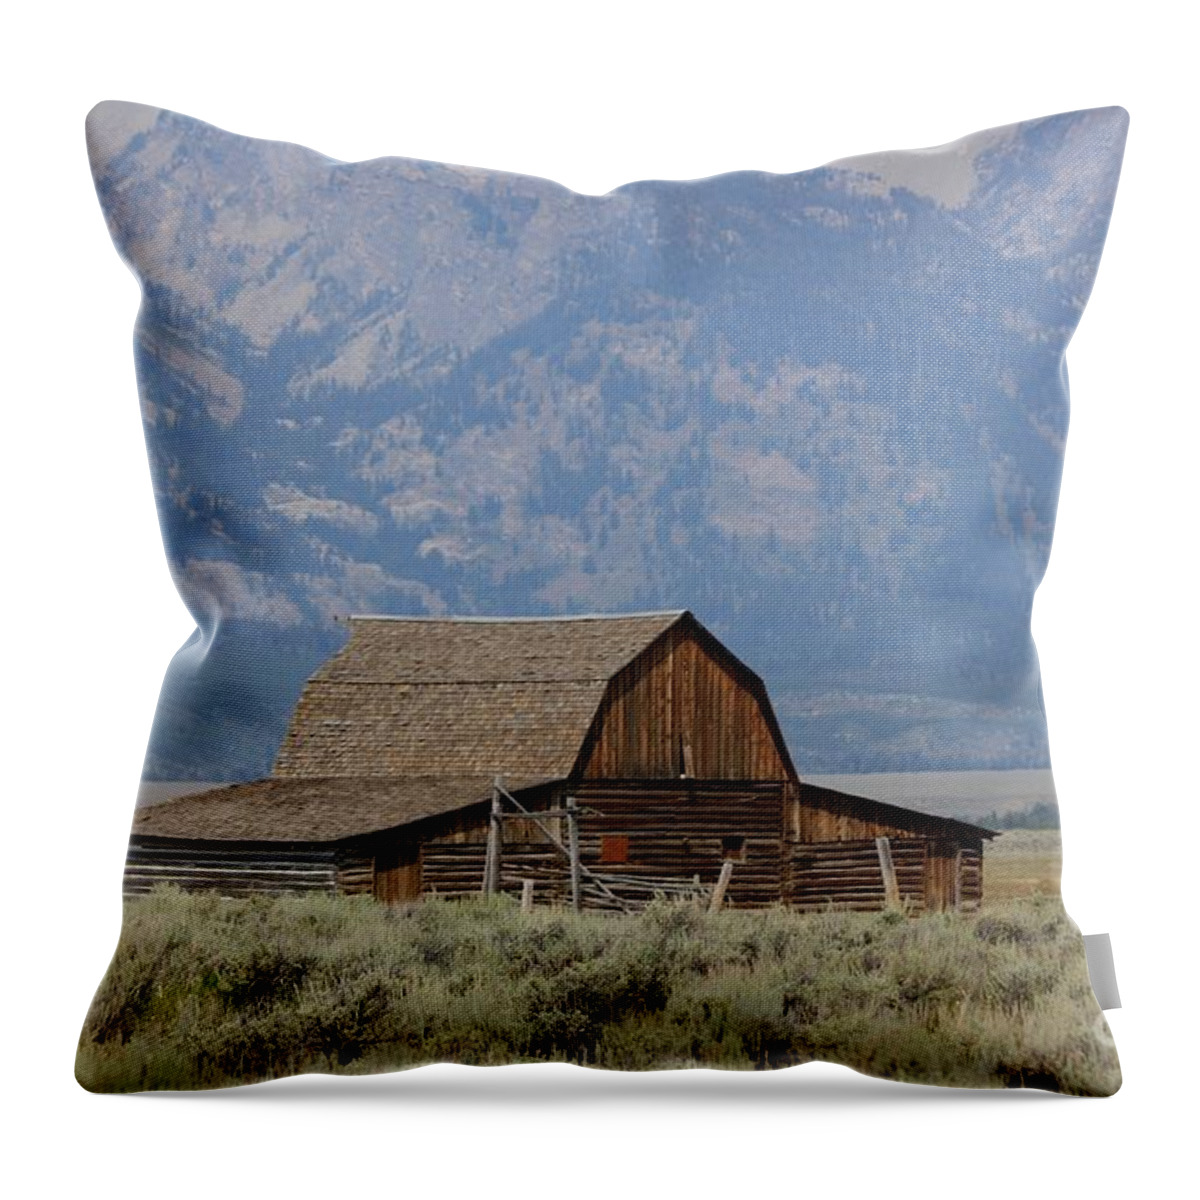 Landscape Throw Pillow featuring the photograph Mormon Row - Grand Teton National Park by Veronica Batterson